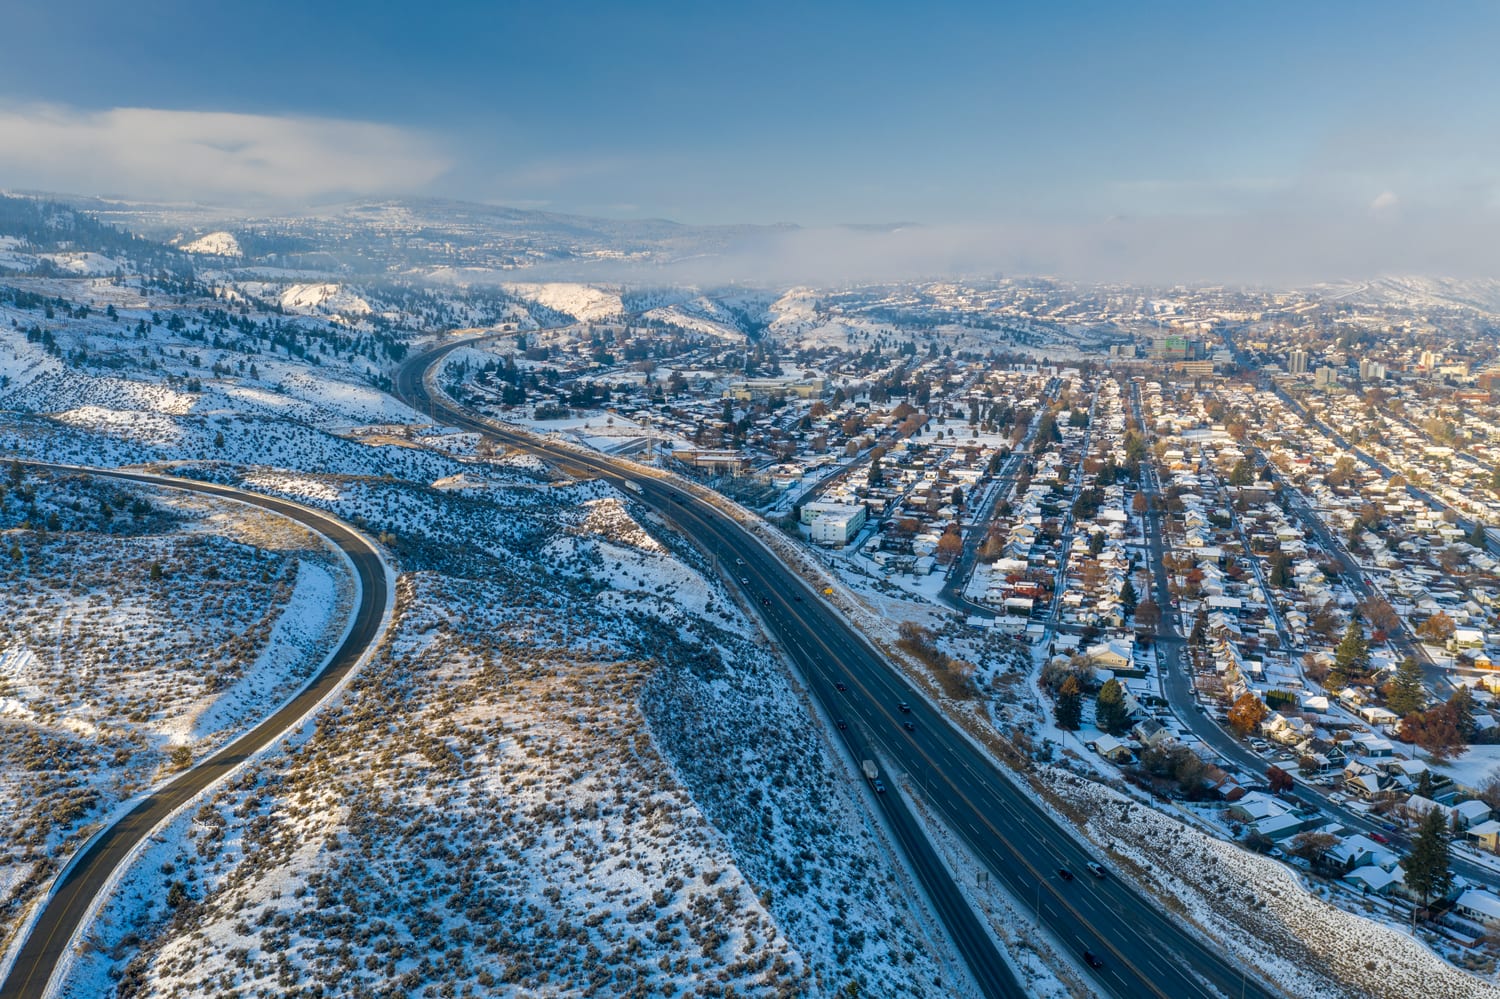 Kamloops City Aerial winding road with trees and snow with city